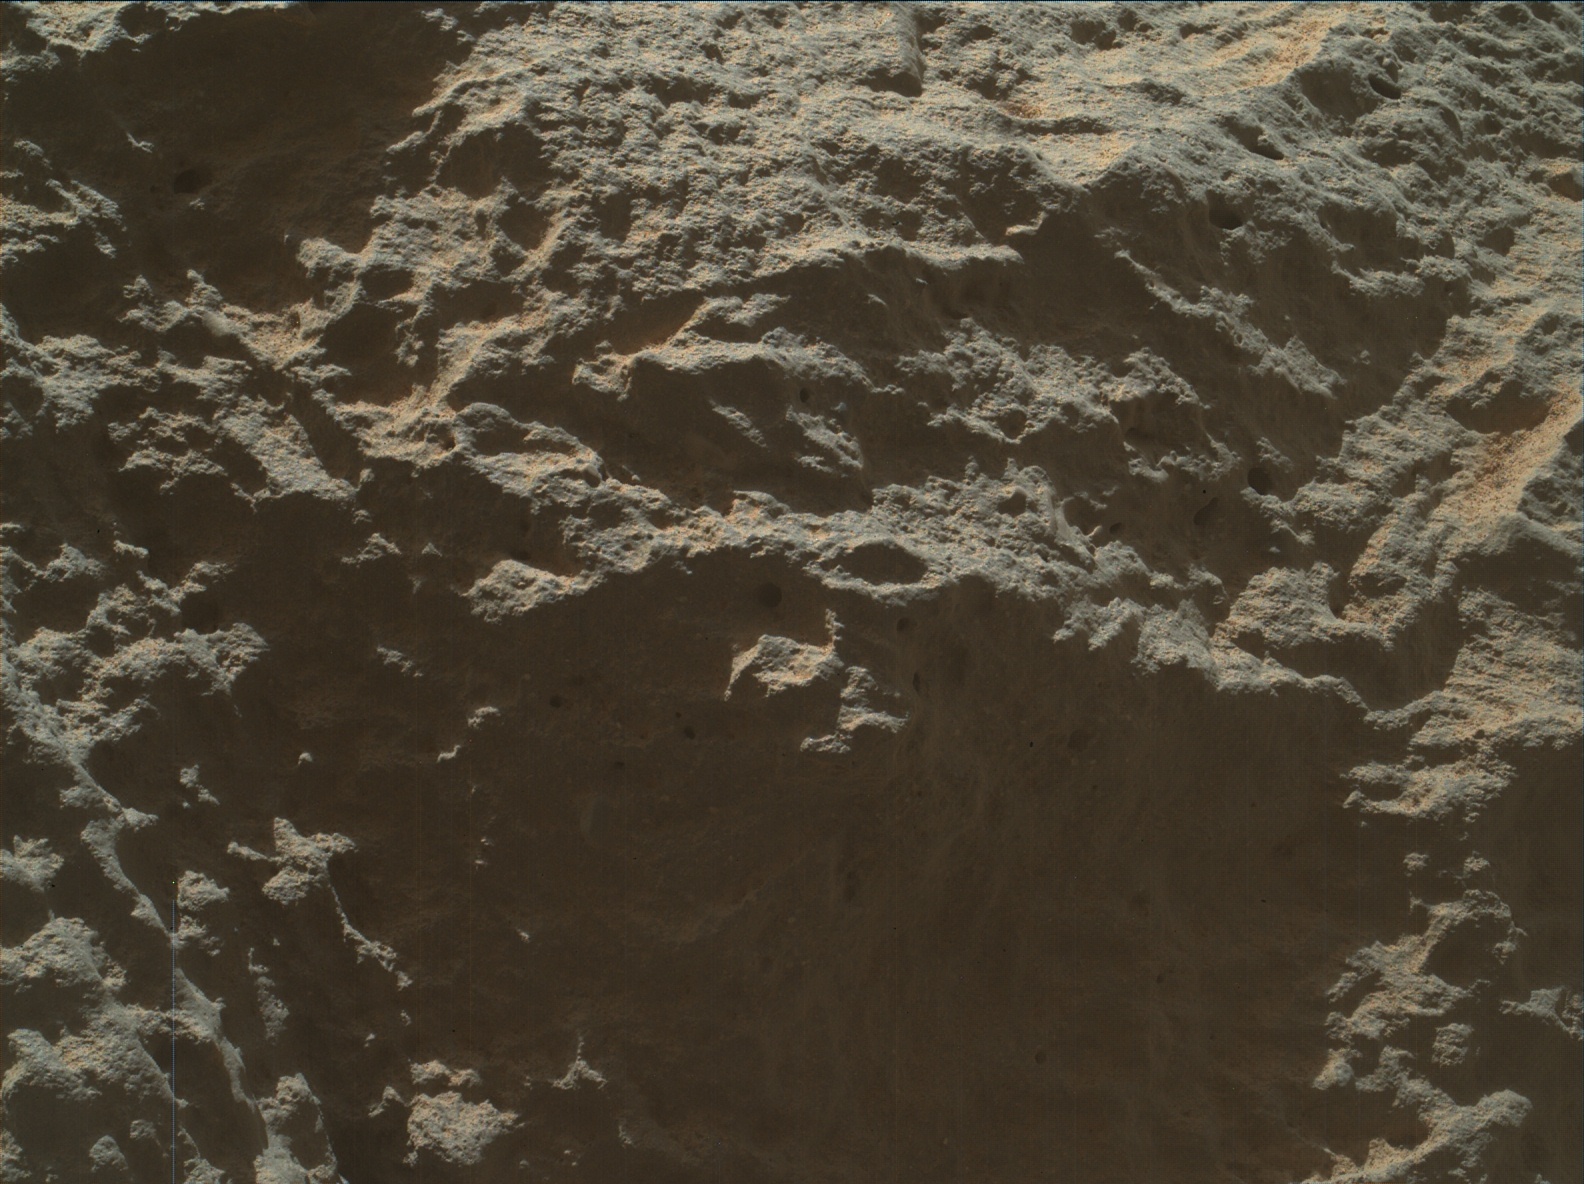 Nasa's Mars rover Curiosity acquired this image using its Mars Hand Lens Imager (MAHLI) on Sol 3318